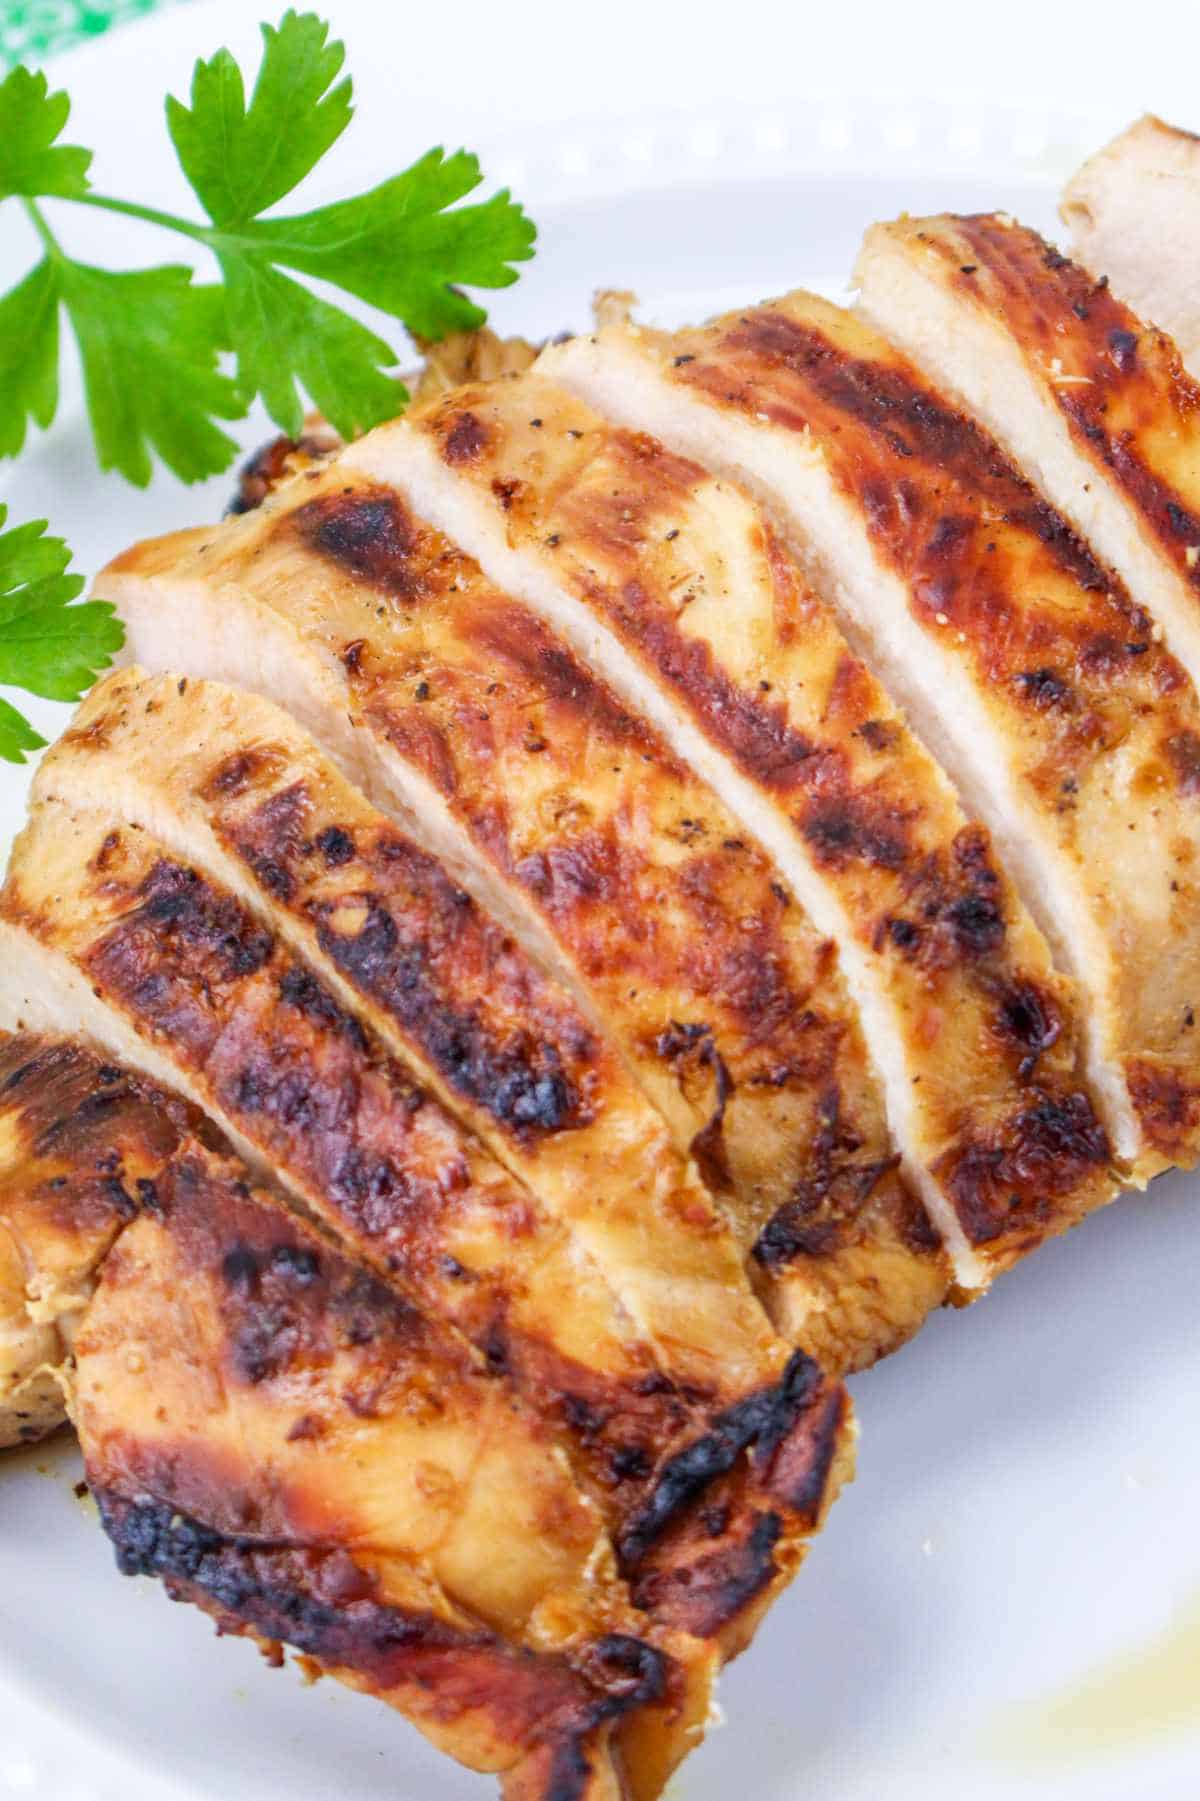 sliced, grilled chicken breasts on a plate.